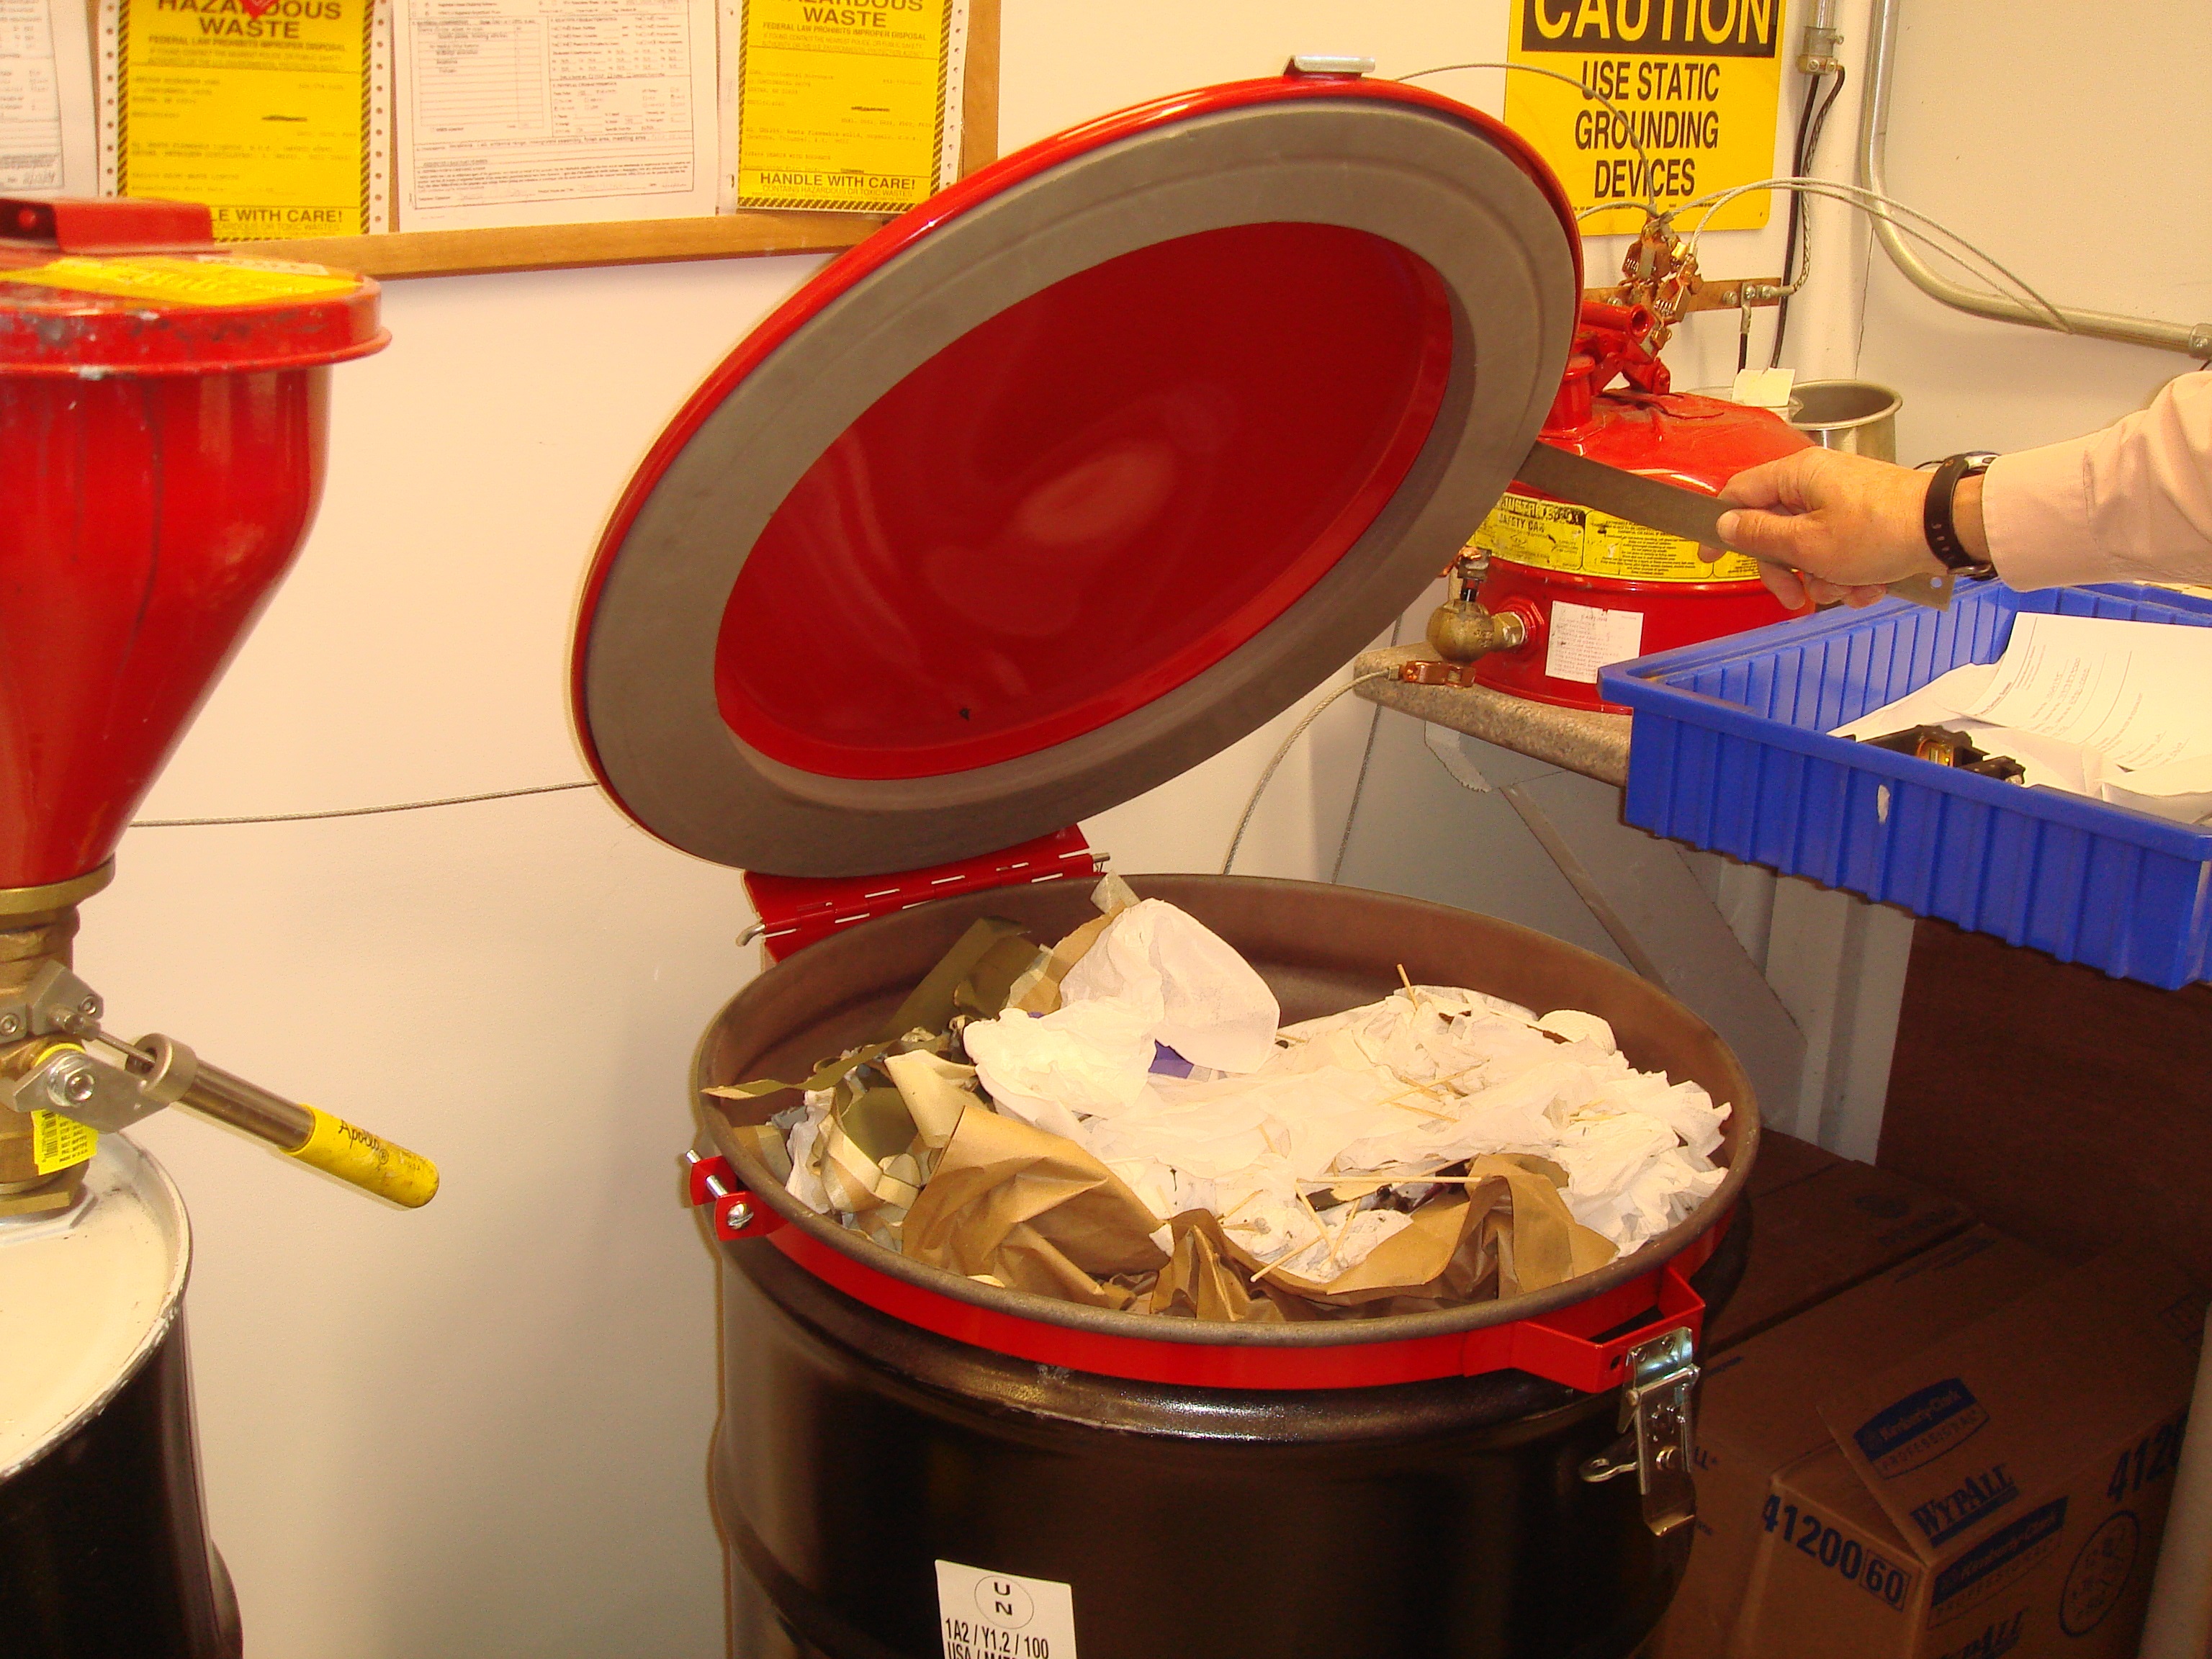 properly sealed hazardous waste containers